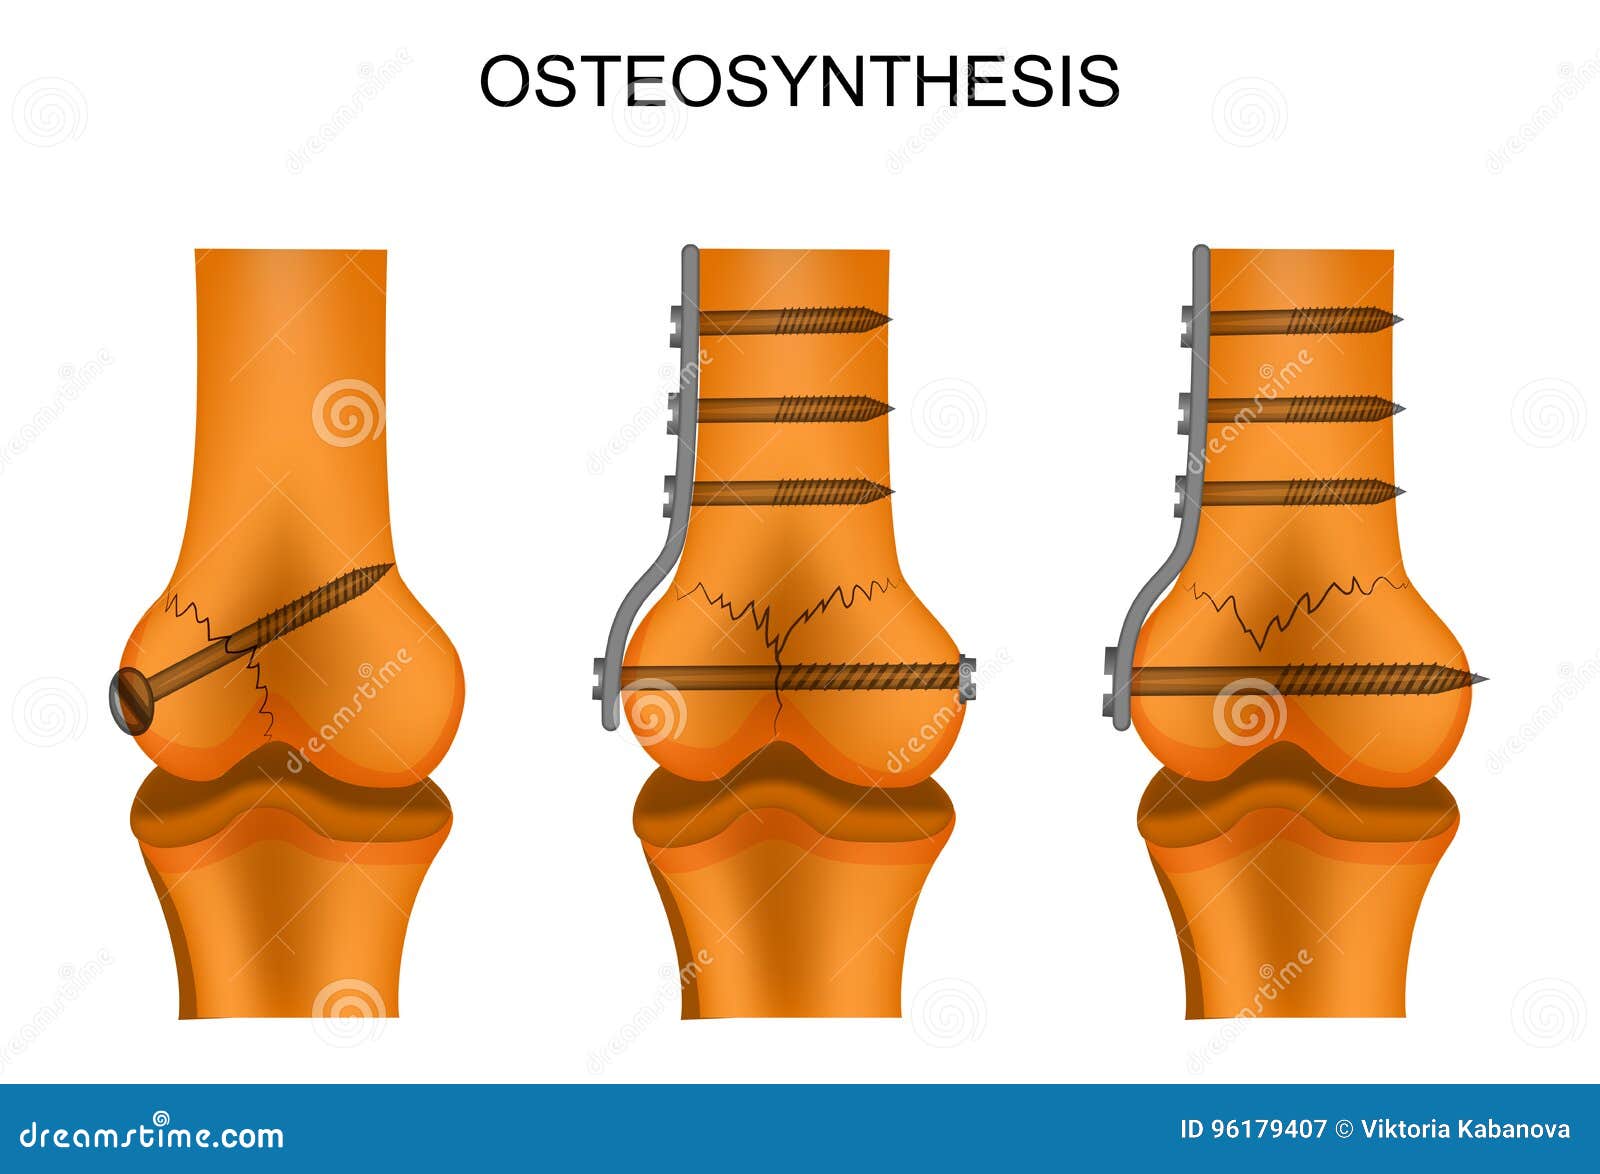 osteosynthesis of the femur